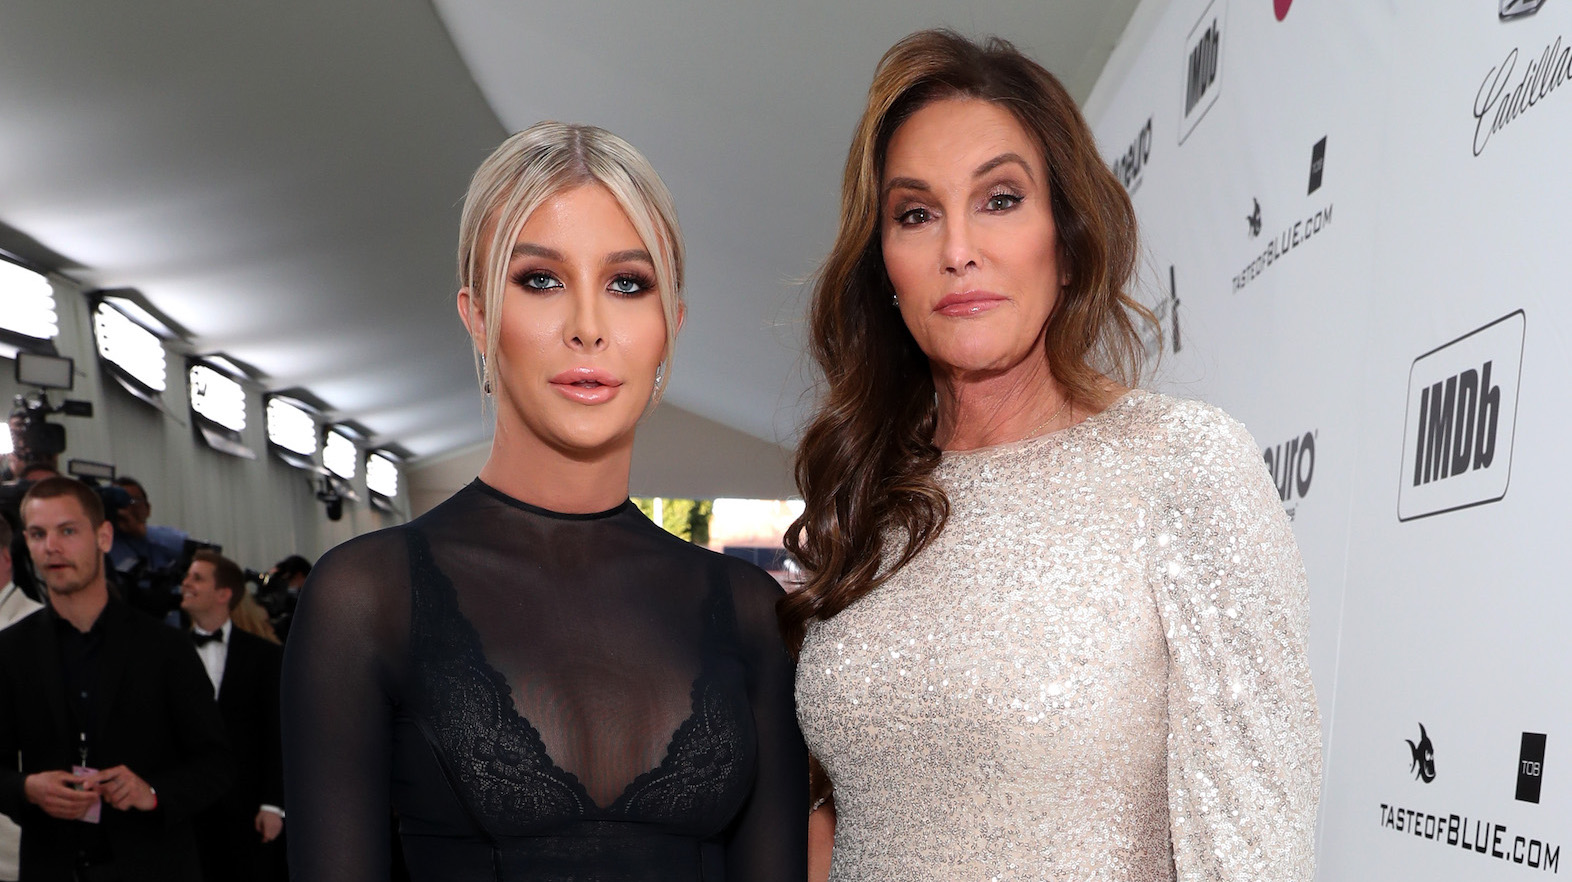 Caitlyn Jenner And Sophia Hutchins Attend Oscars Viewing Party